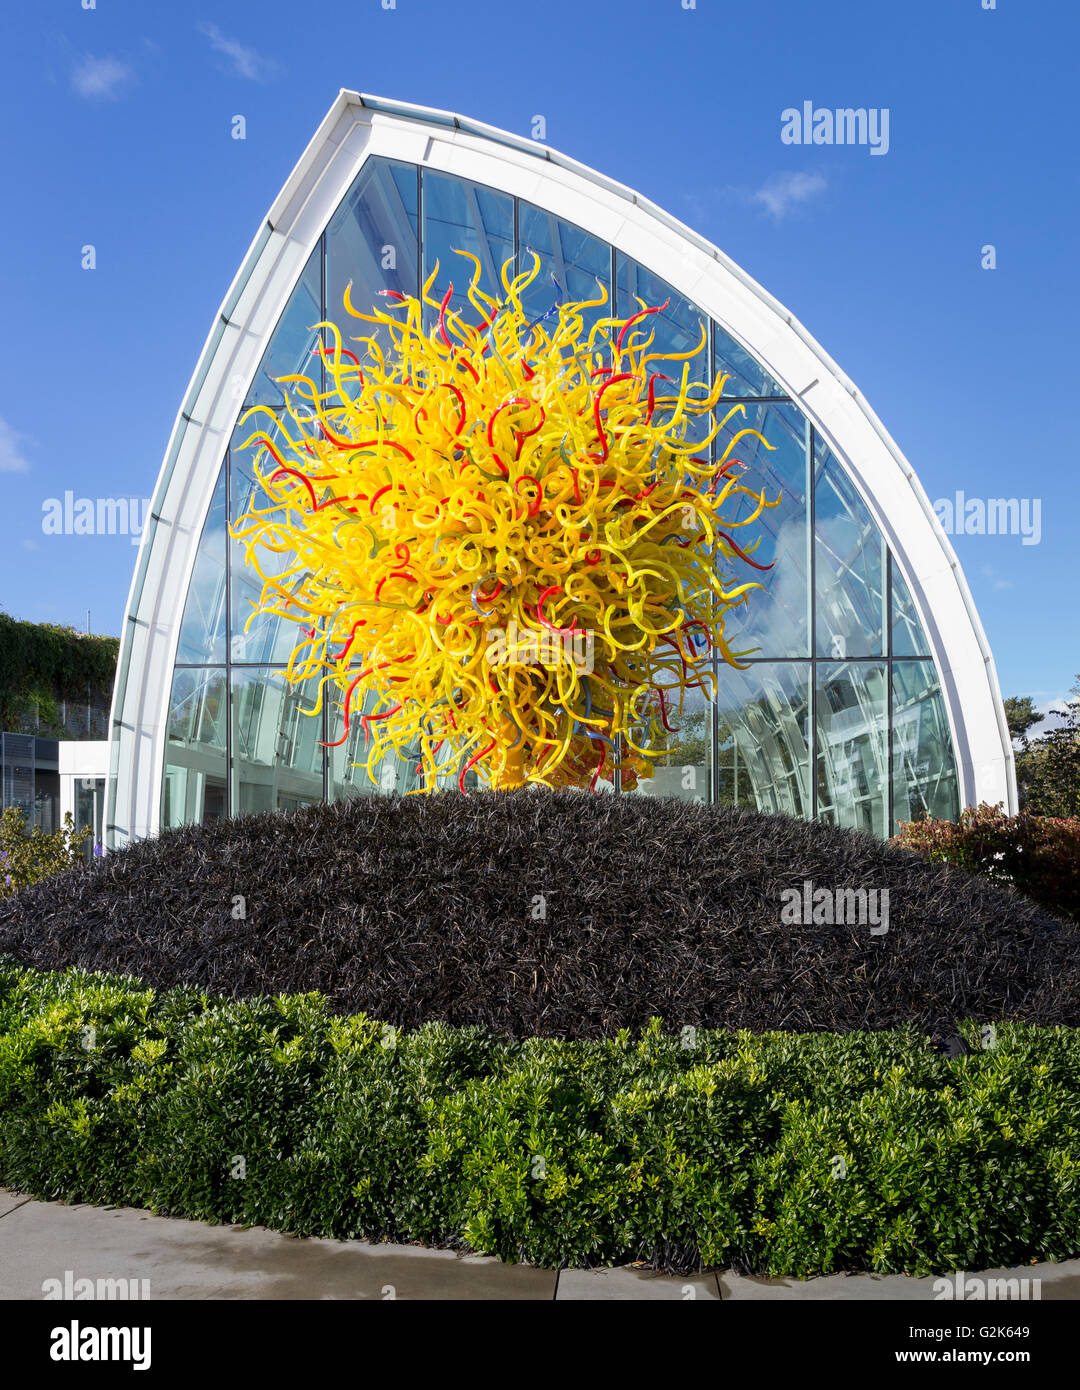 'The Sun' a glass sculpture by Dale Chihuly in front of the 'Glasshouse' at the Chihuly Garden and Glass Gallery in Seattle, WA Stock Photo